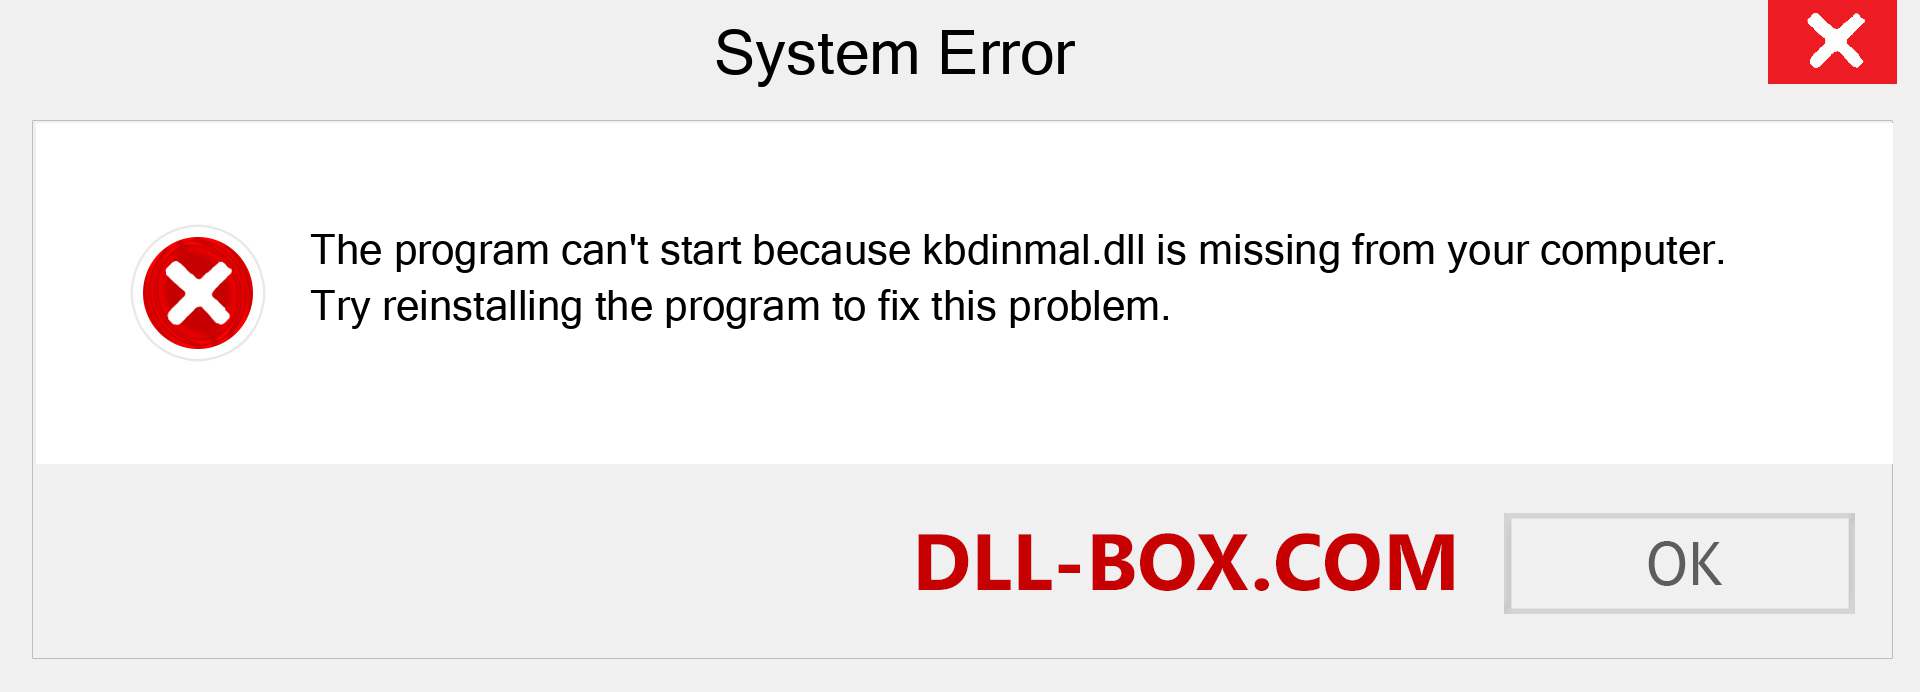  kbdinmal.dll file is missing?. Download for Windows 7, 8, 10 - Fix  kbdinmal dll Missing Error on Windows, photos, images